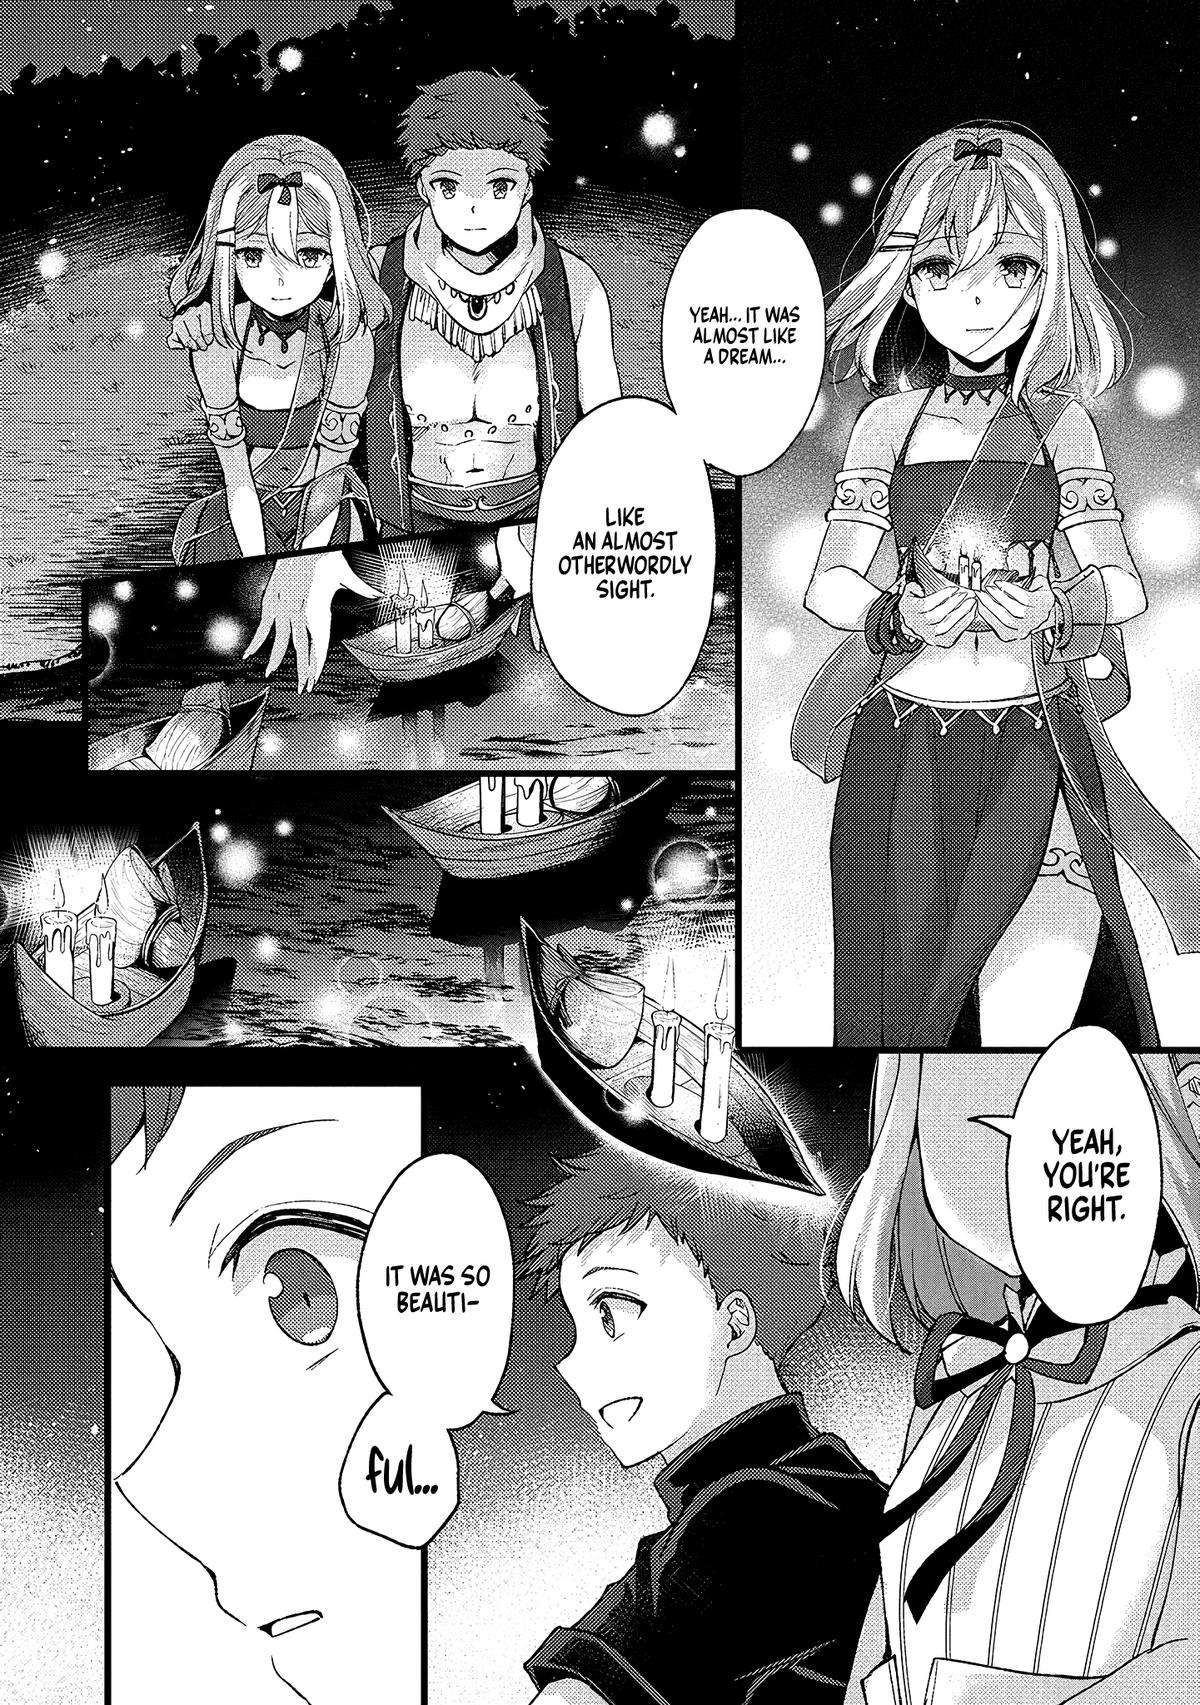 A Sword Master Childhood Friend Power Harassed Me Harshly - chapter 24 - #2